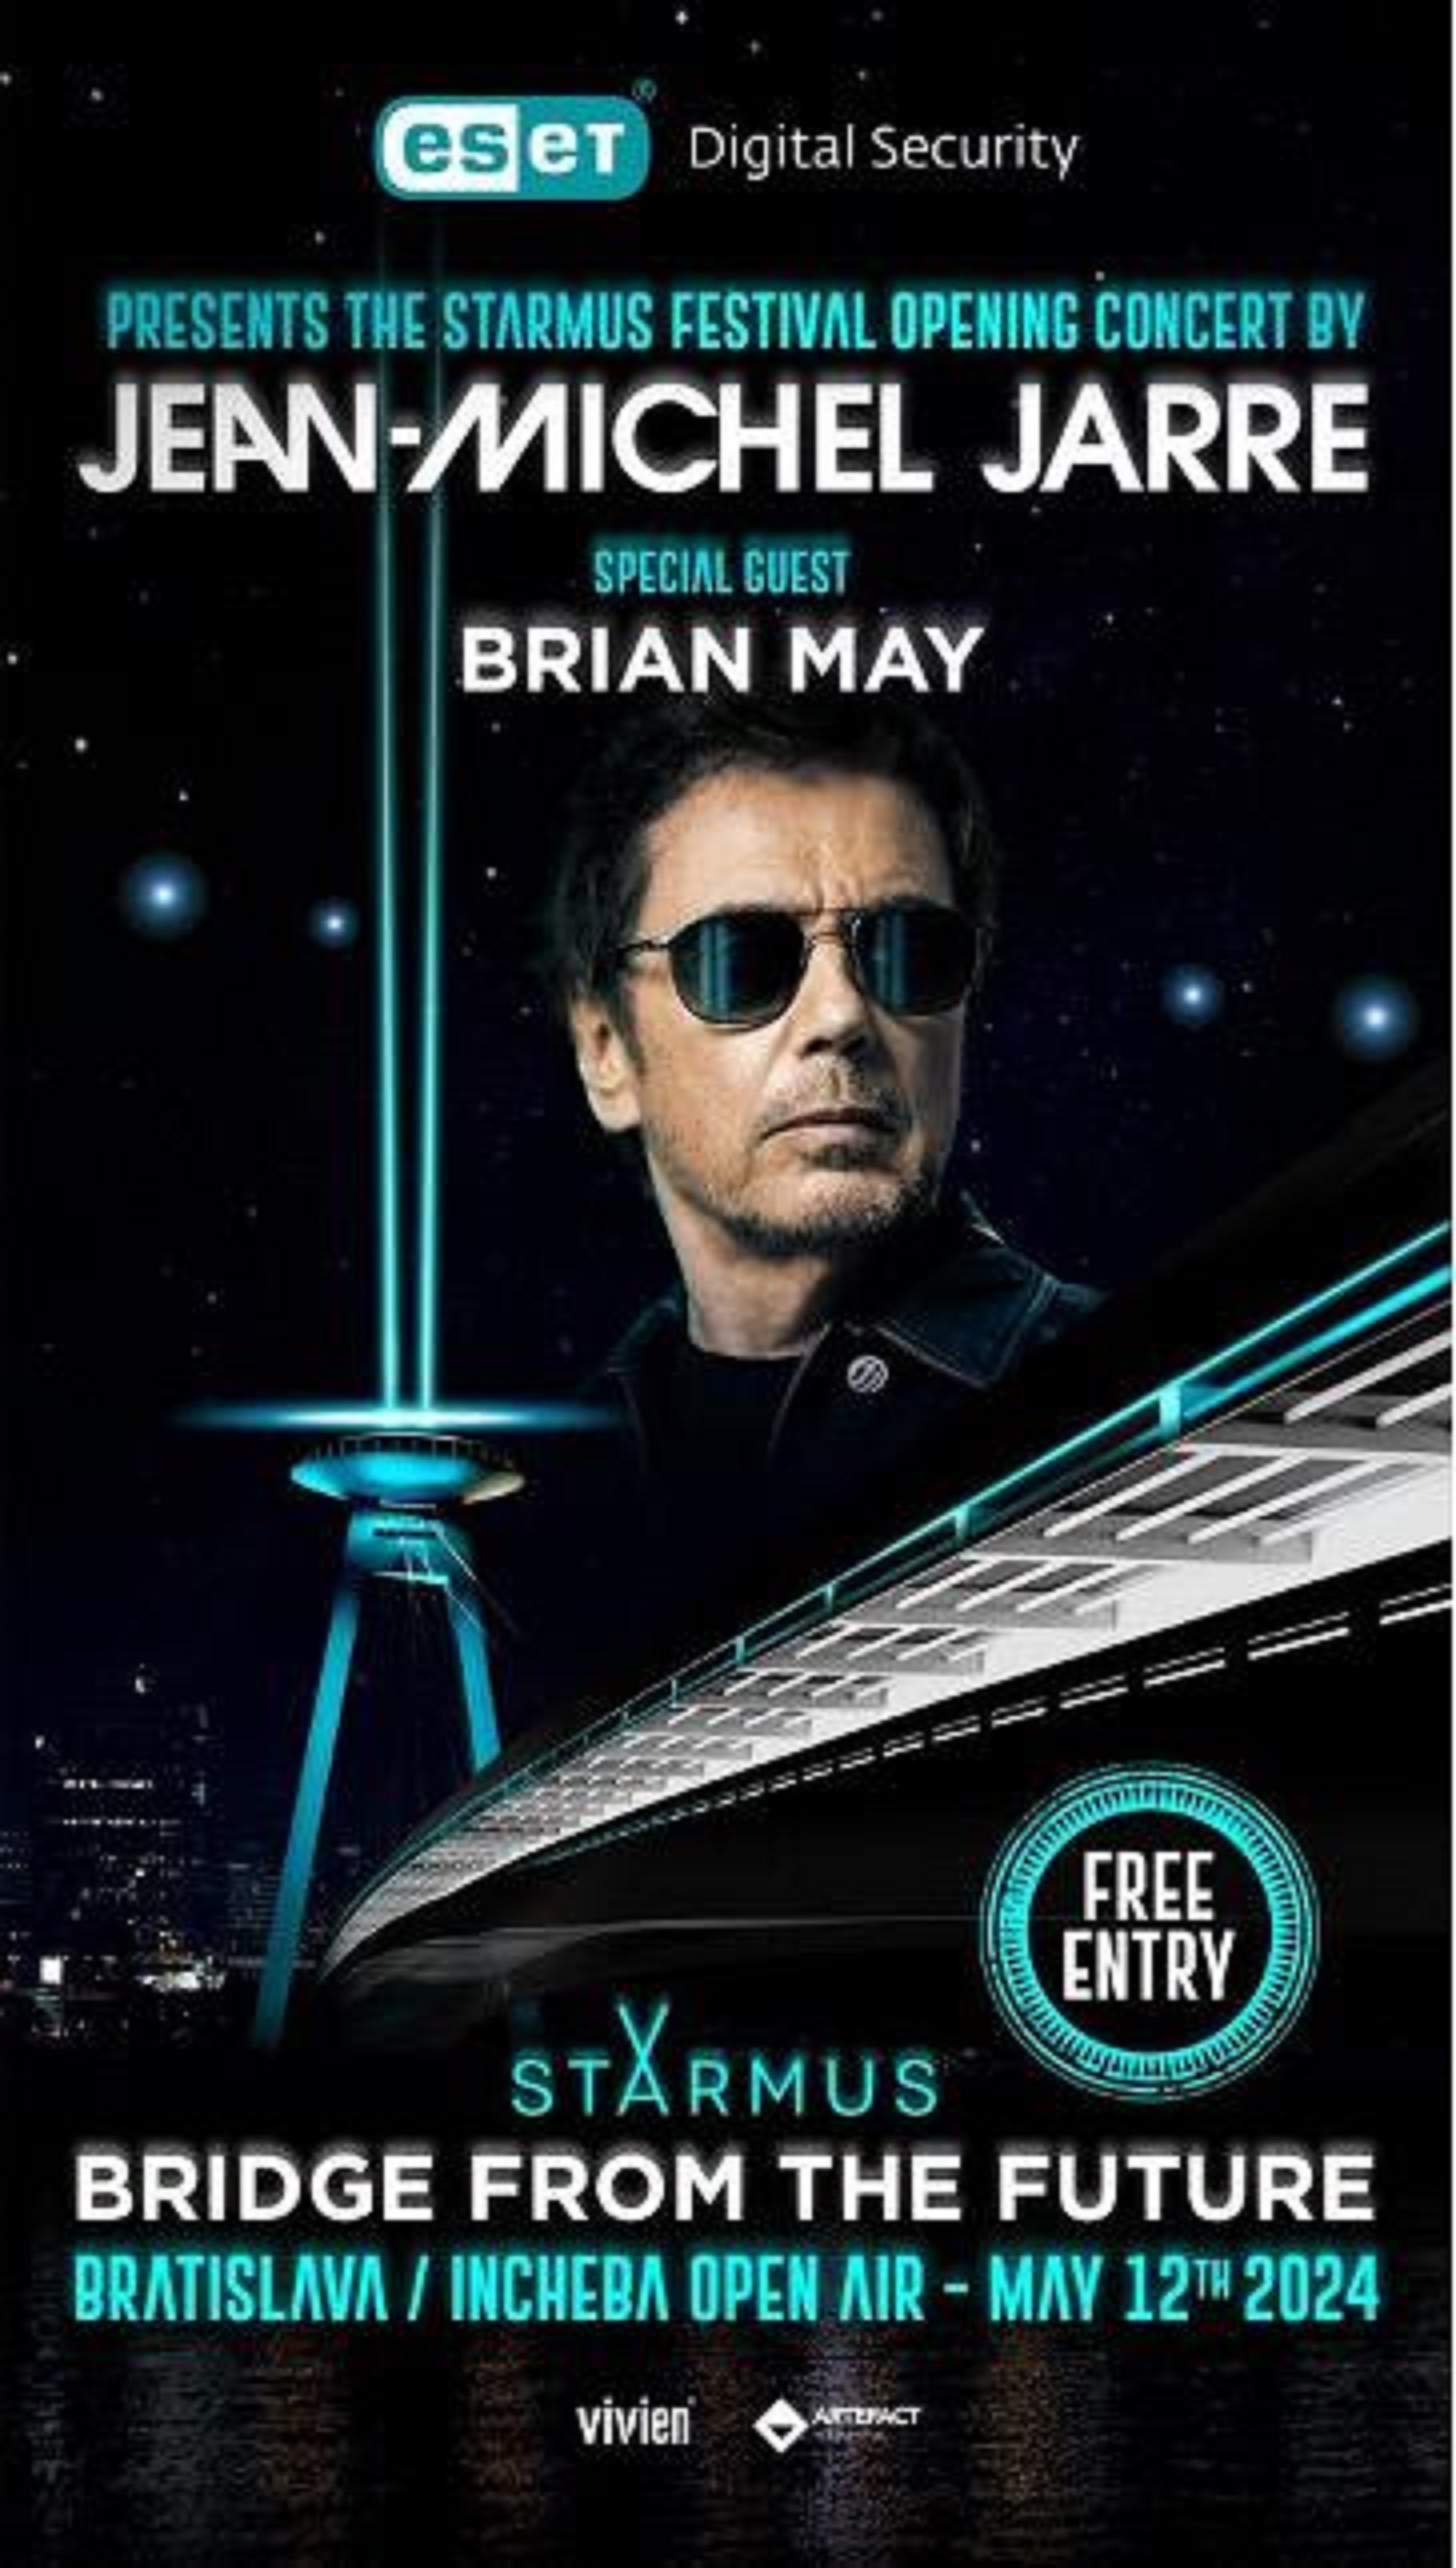 Jean-Michel Jarre STARMUS Festival ‘Bridge From The Future’ Concert Live Stream with Special Guest Brian May Sunday, May 12